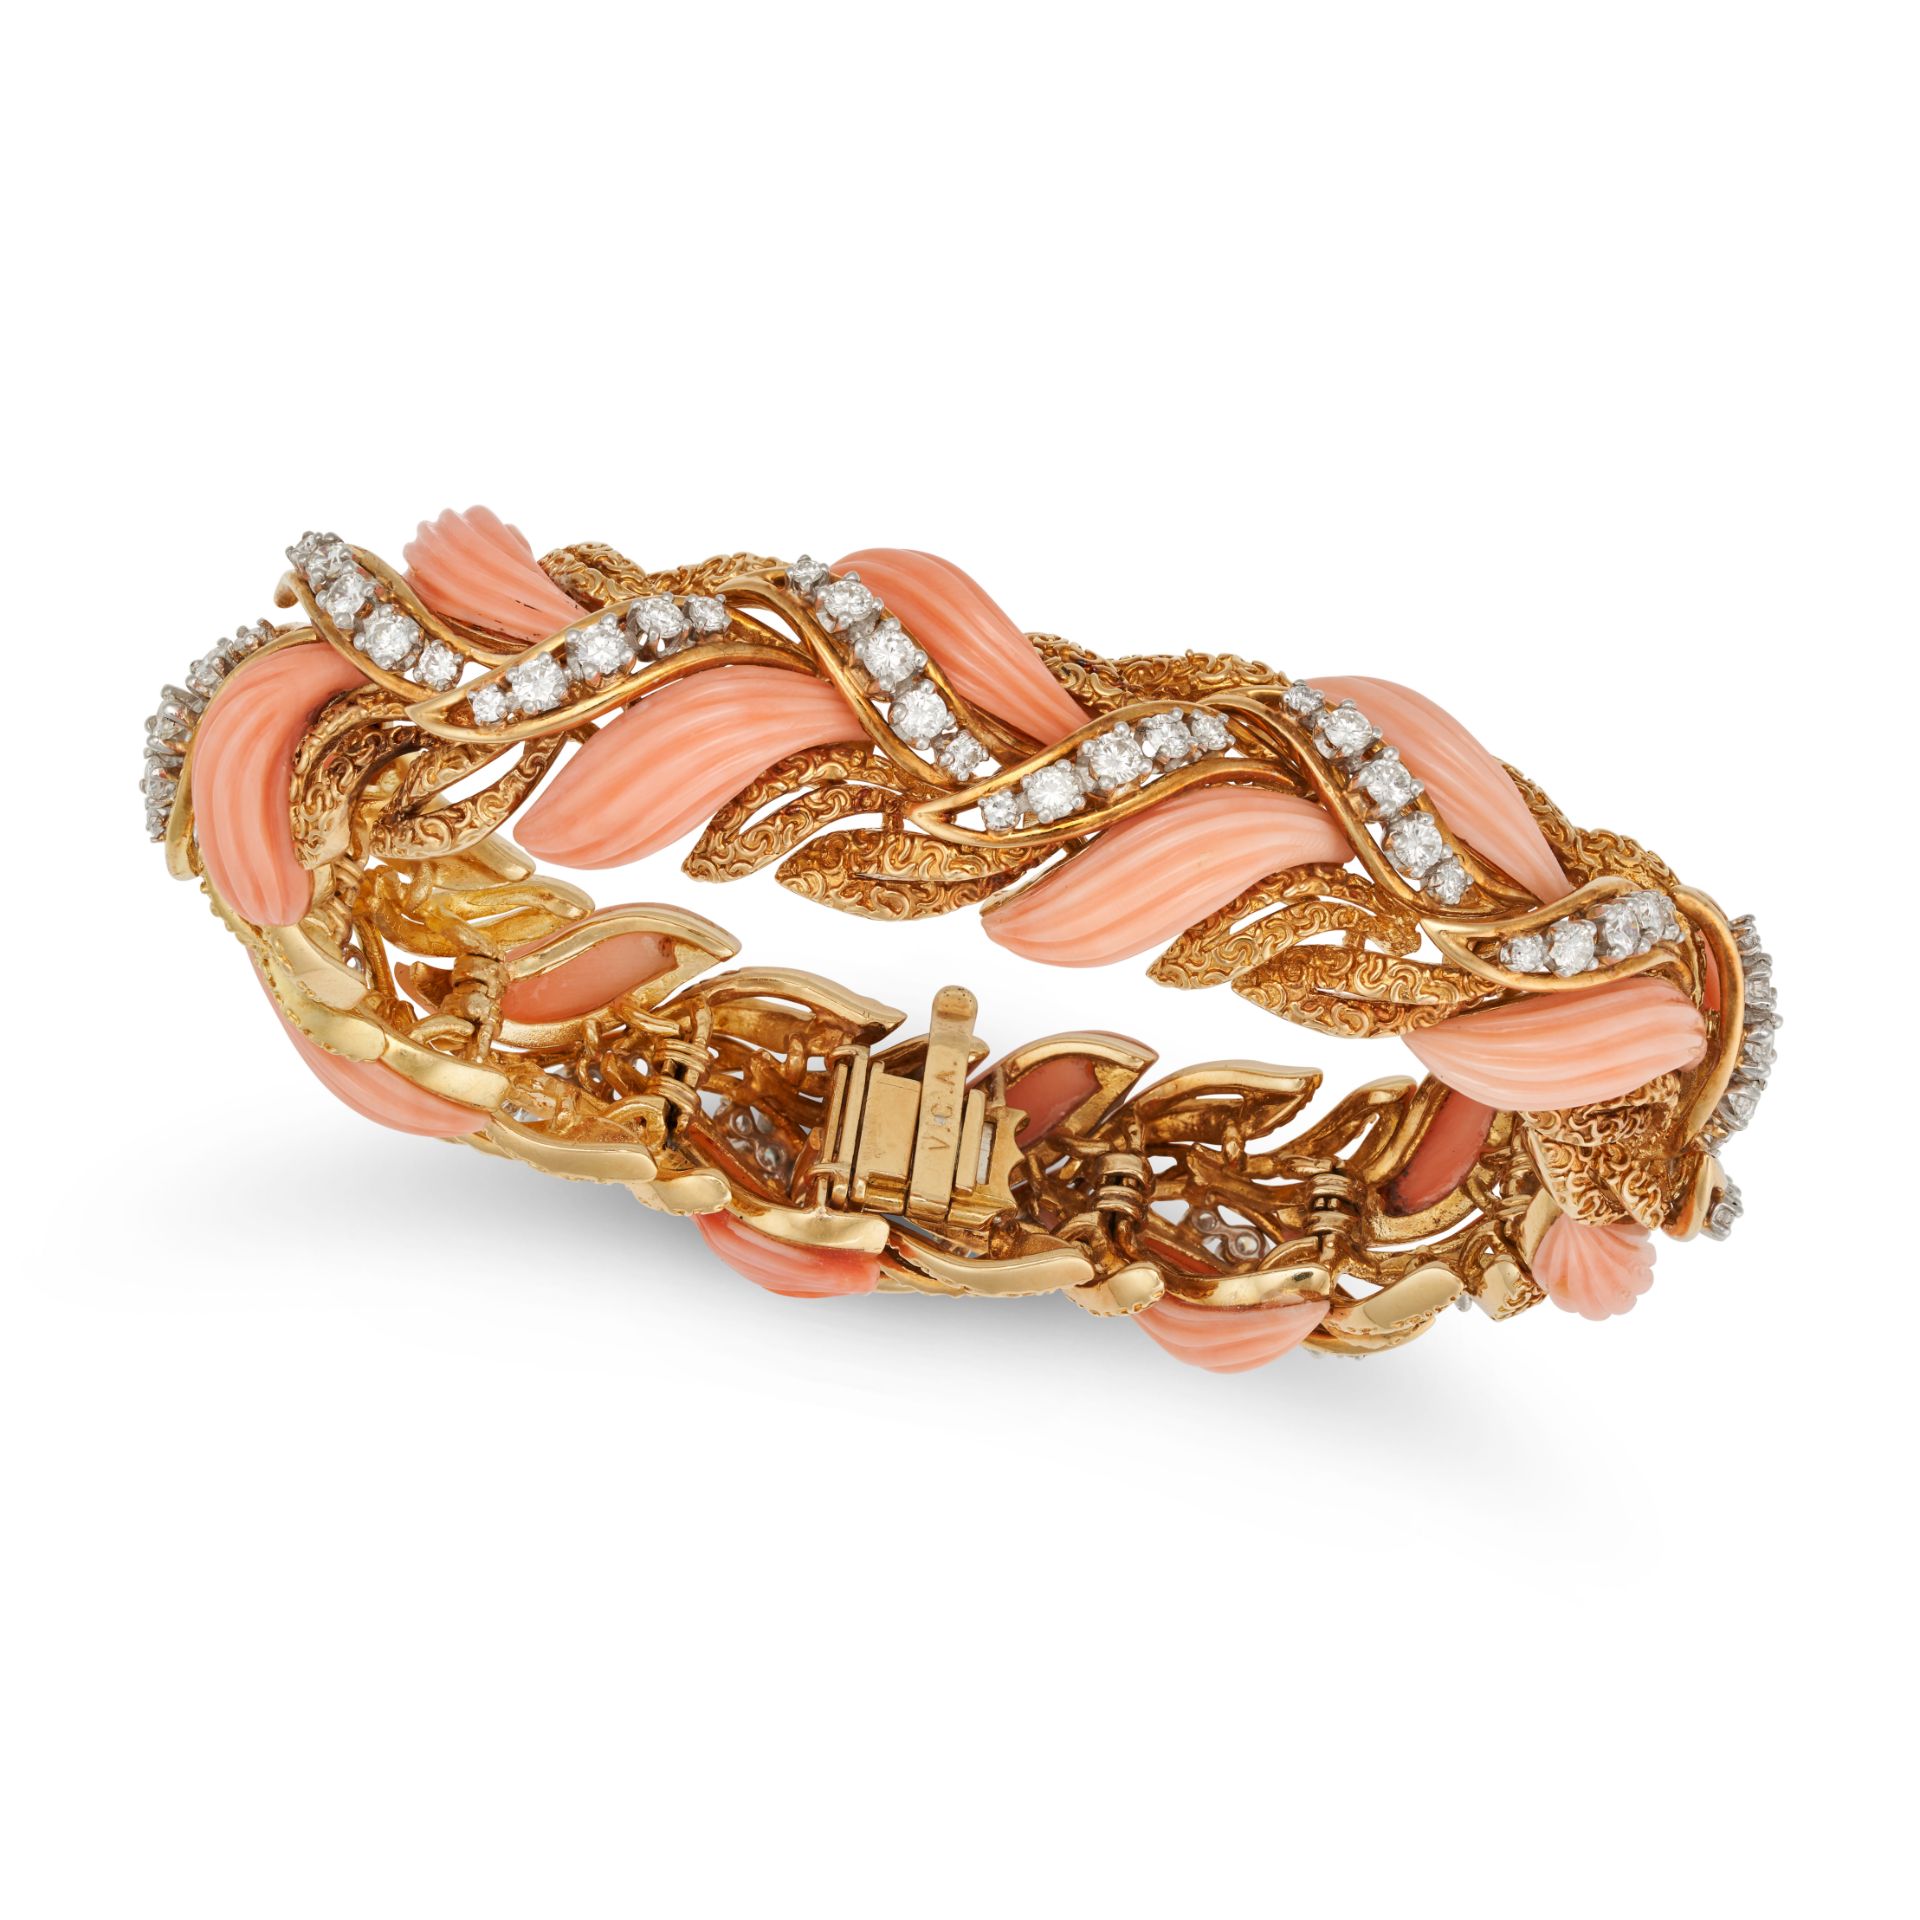 A CORAL AND DIAMOND BRACELET in yellow gold, the foliate style bracelet set with carved coral, ac...